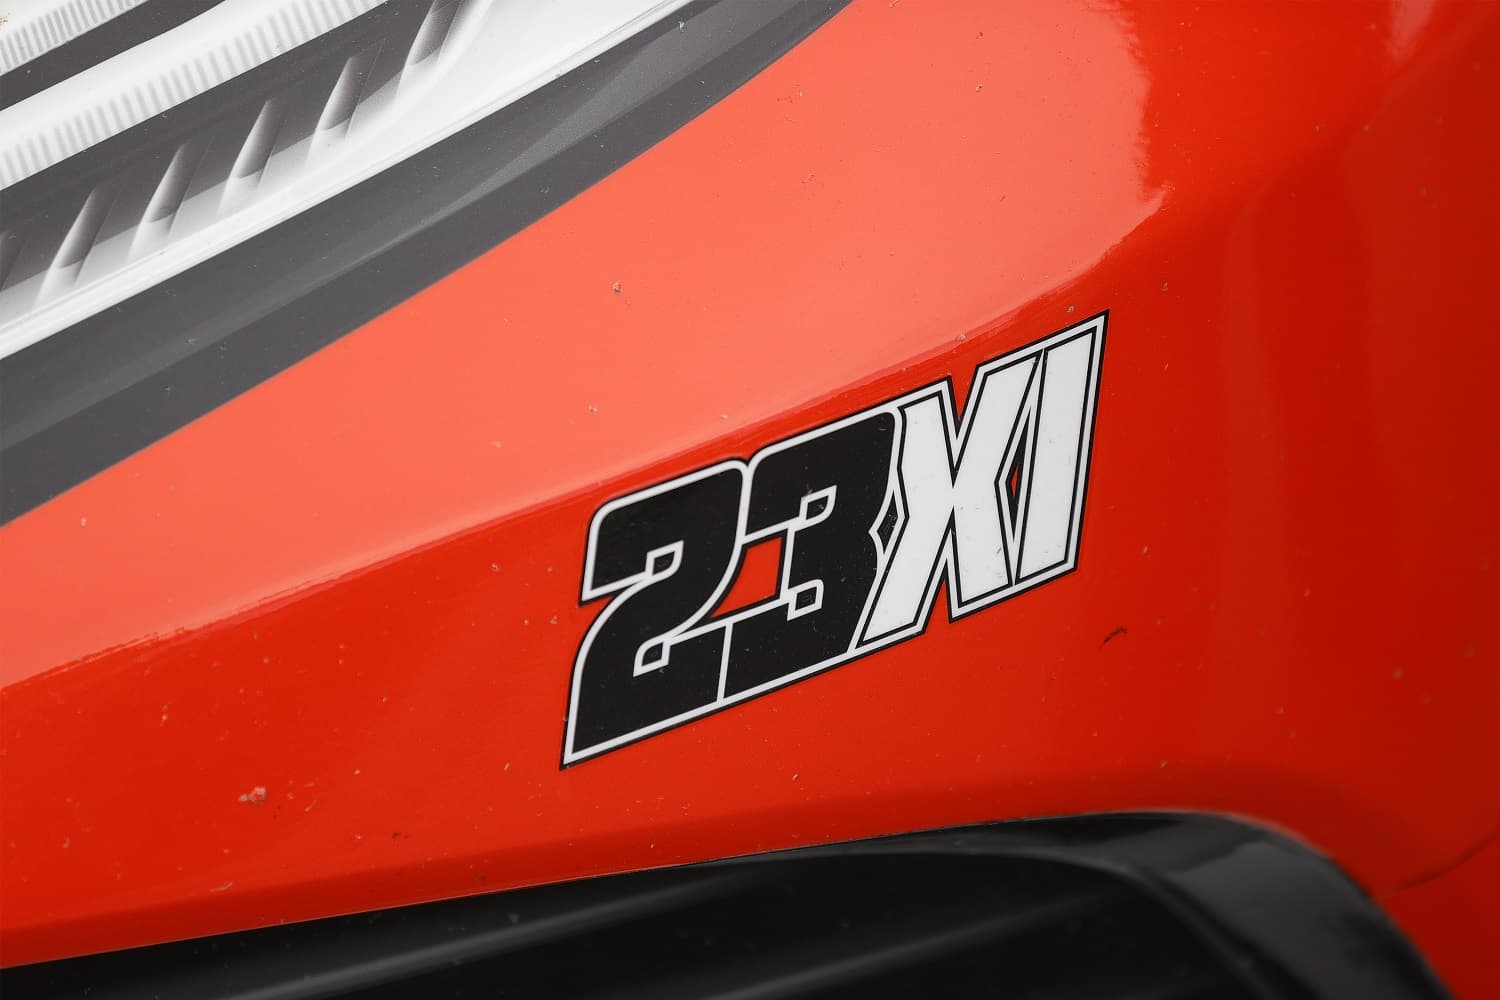 Detail of the 23XI Racing logo on the #23 DoorDash Toyota driven by Bubba Wallace on the grid prior to the NASCAR Cup Series Daytona 500 on February 14, 2021.  Jared C.  Tilton / Getty Images